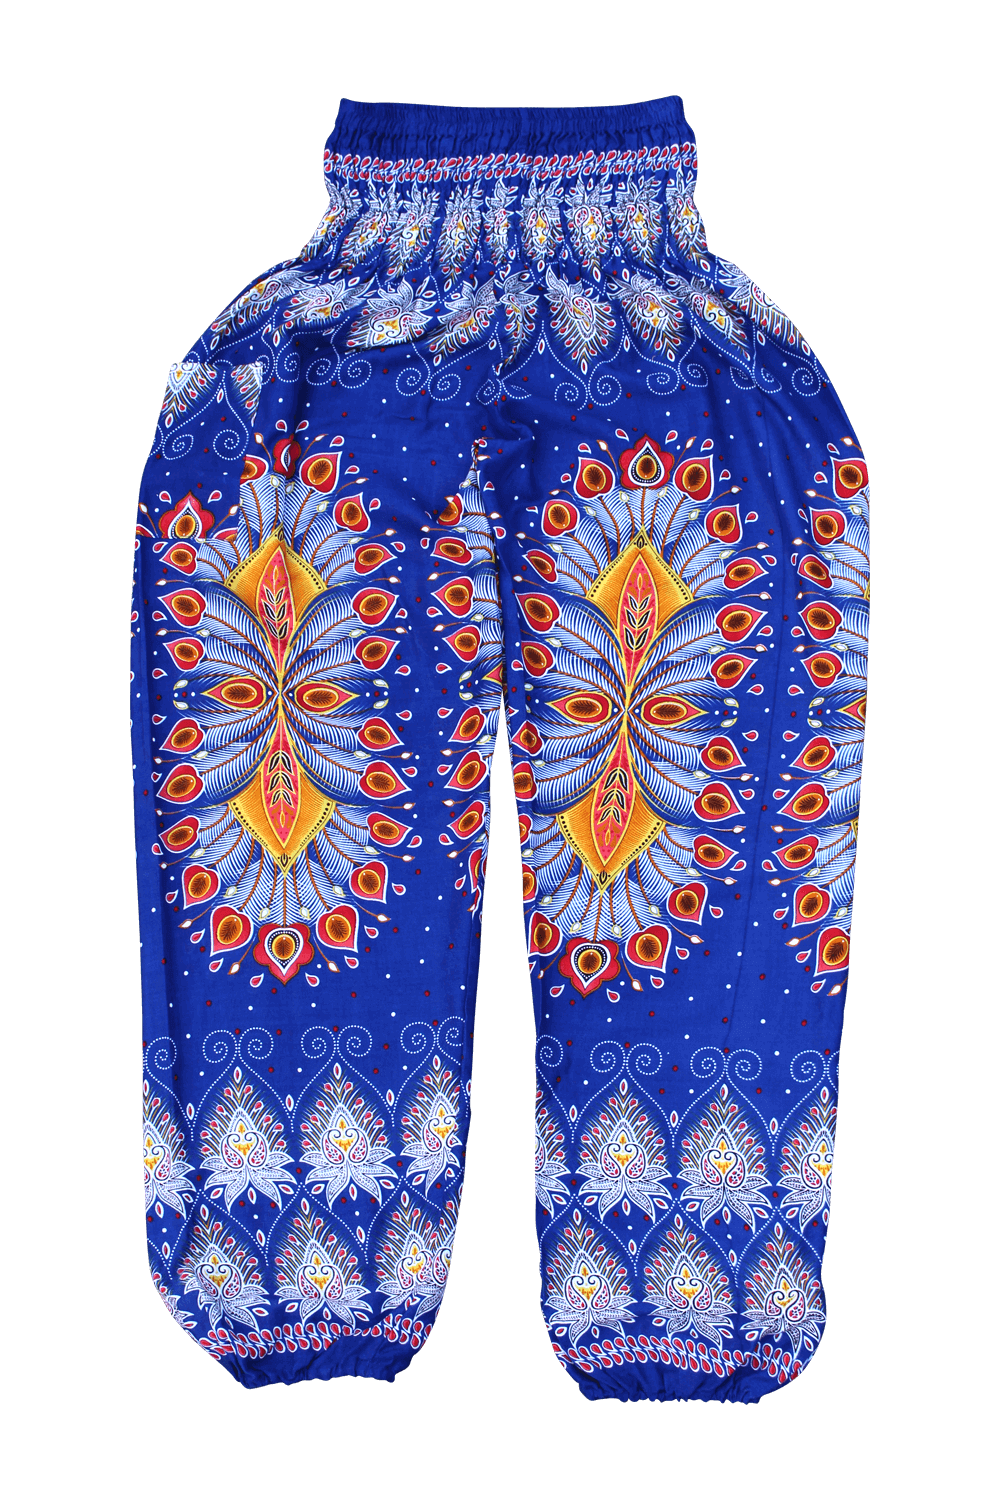 Blue Blossom Harem Pants from Bohemian Island's Spring 2019 Collection